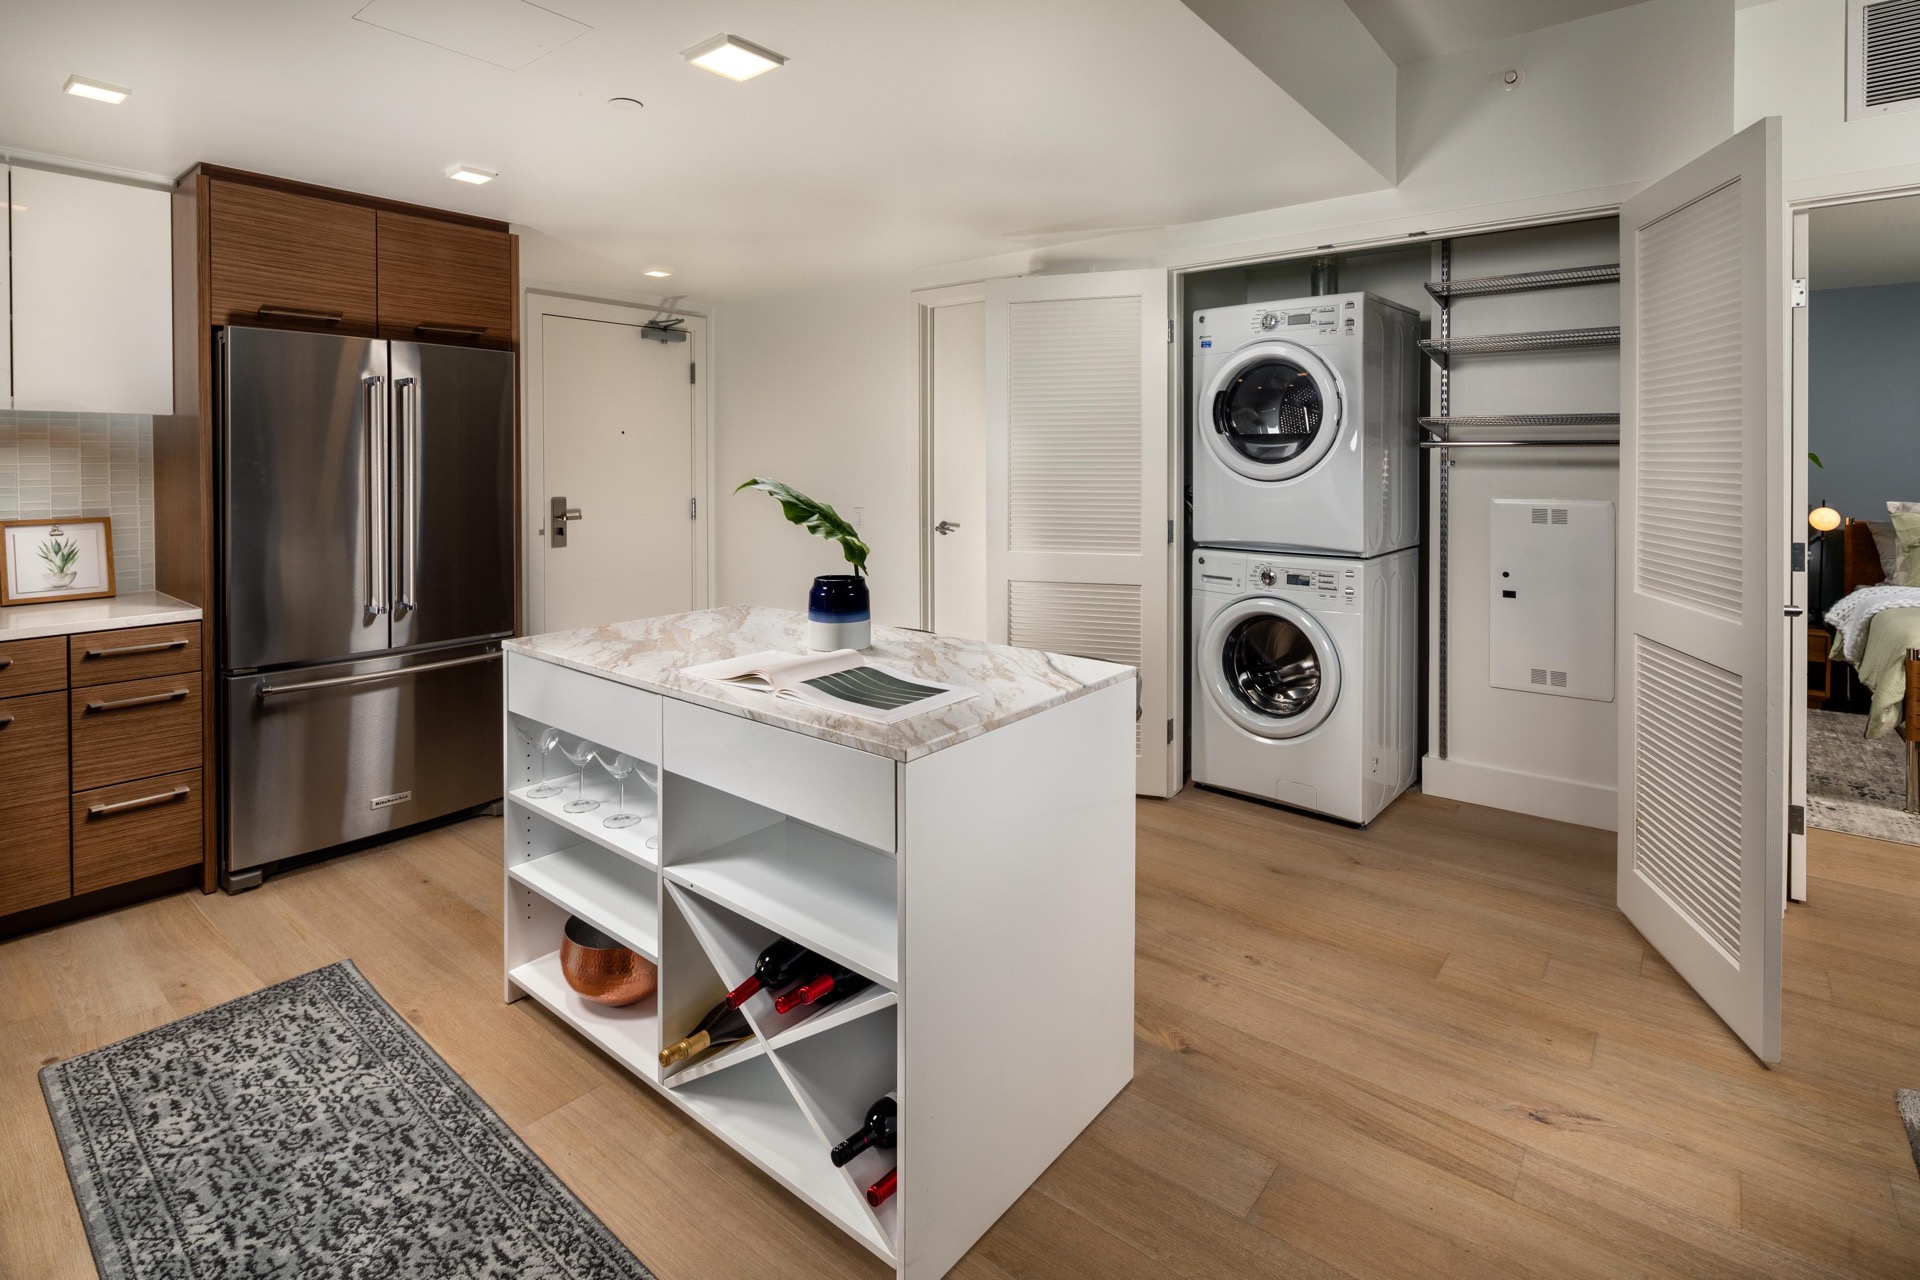 Laundry room with additional storage